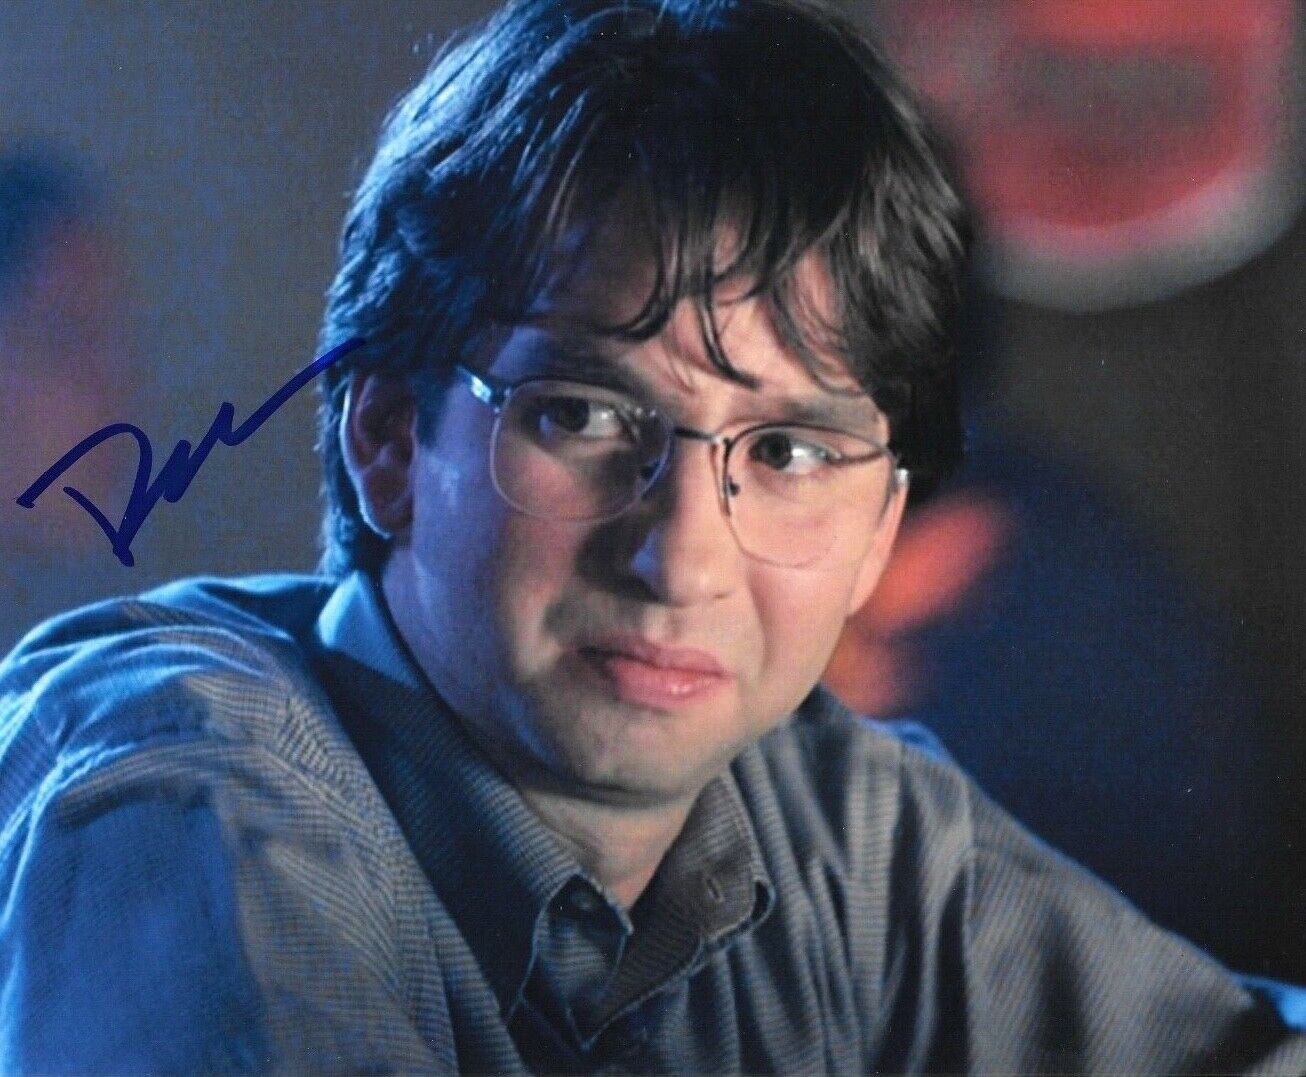 * DAVID HERMAN * signed autographed 8x10 Photo Poster painting * OFFICE SPACE * COA * 2